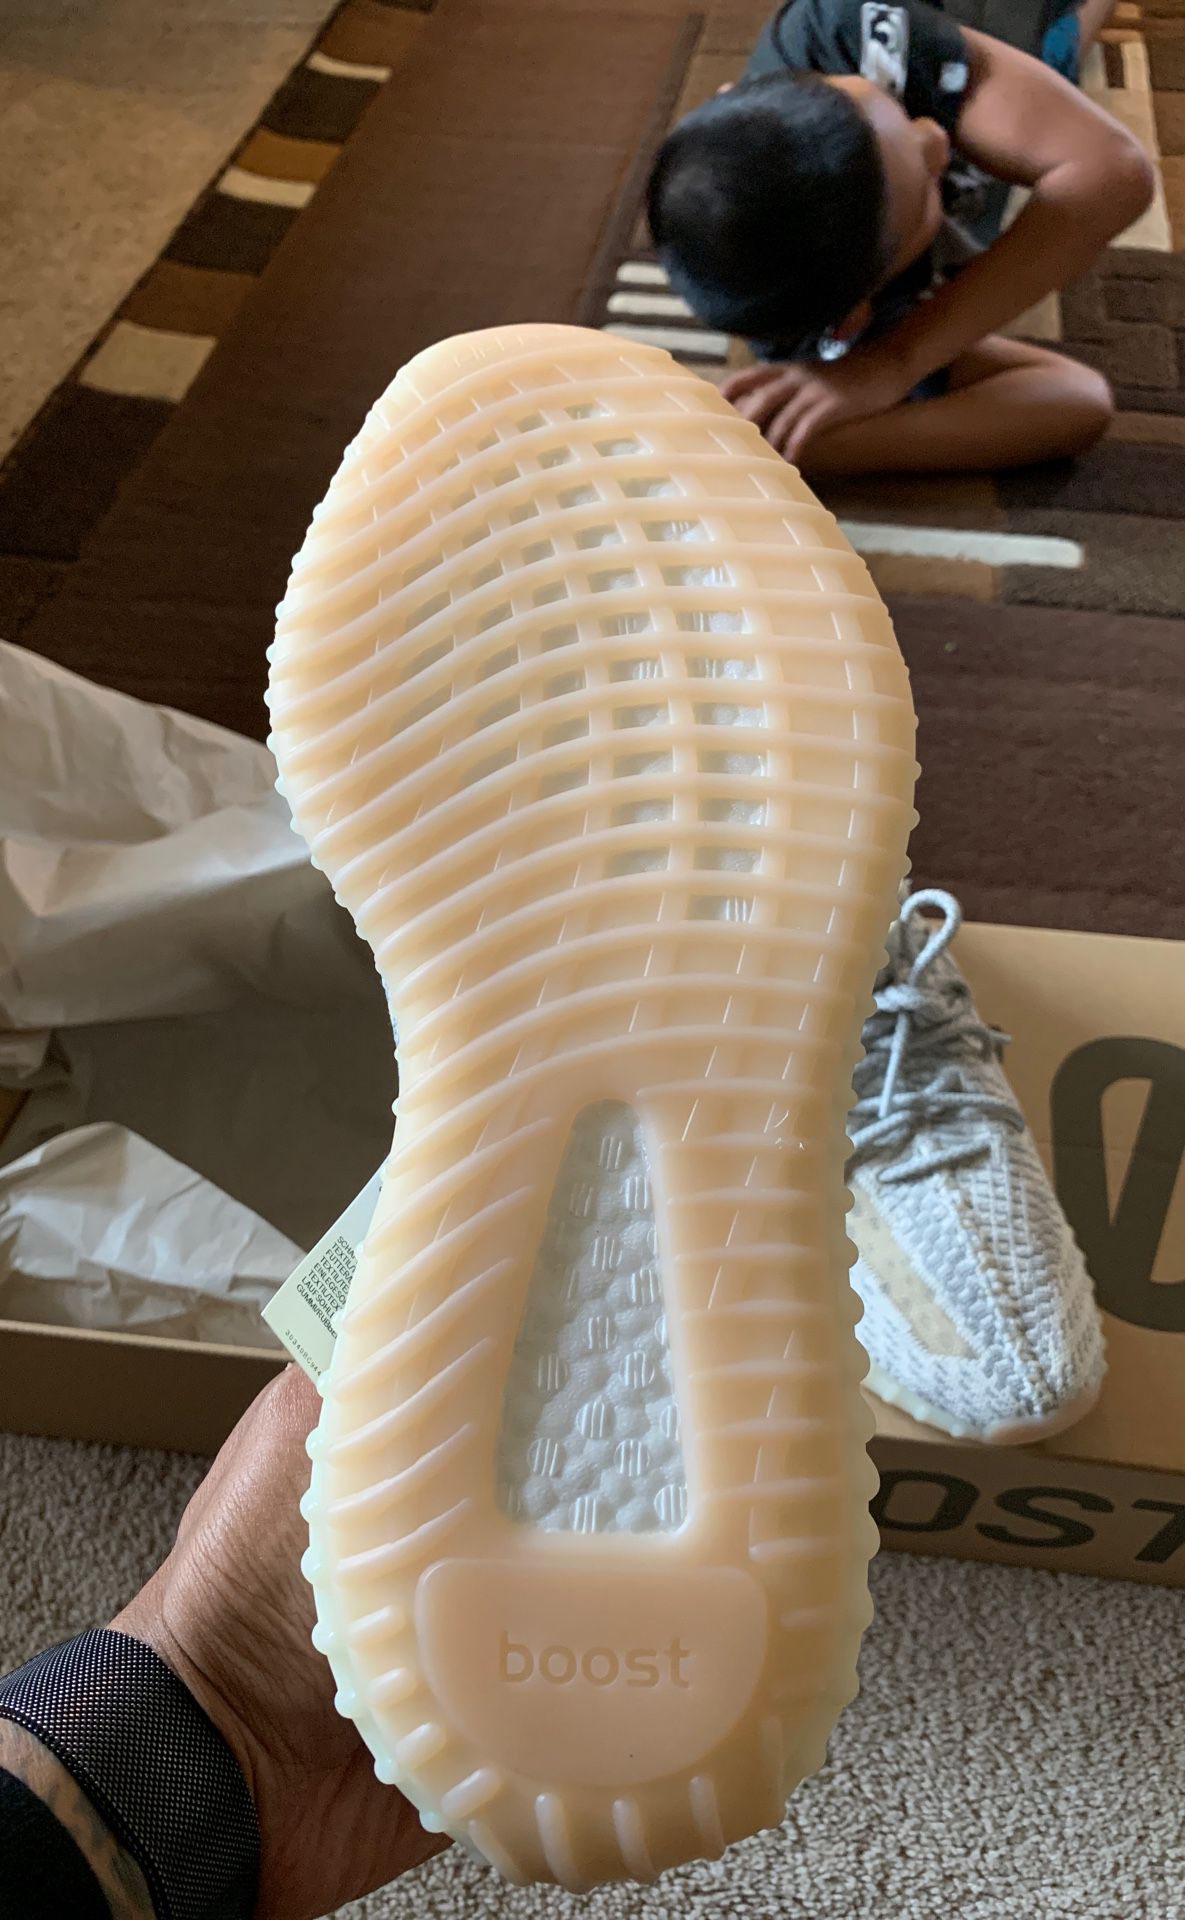 Yeezy Boost 350 V2 Lundmark for Sale in Lacey, WA - OfferUp